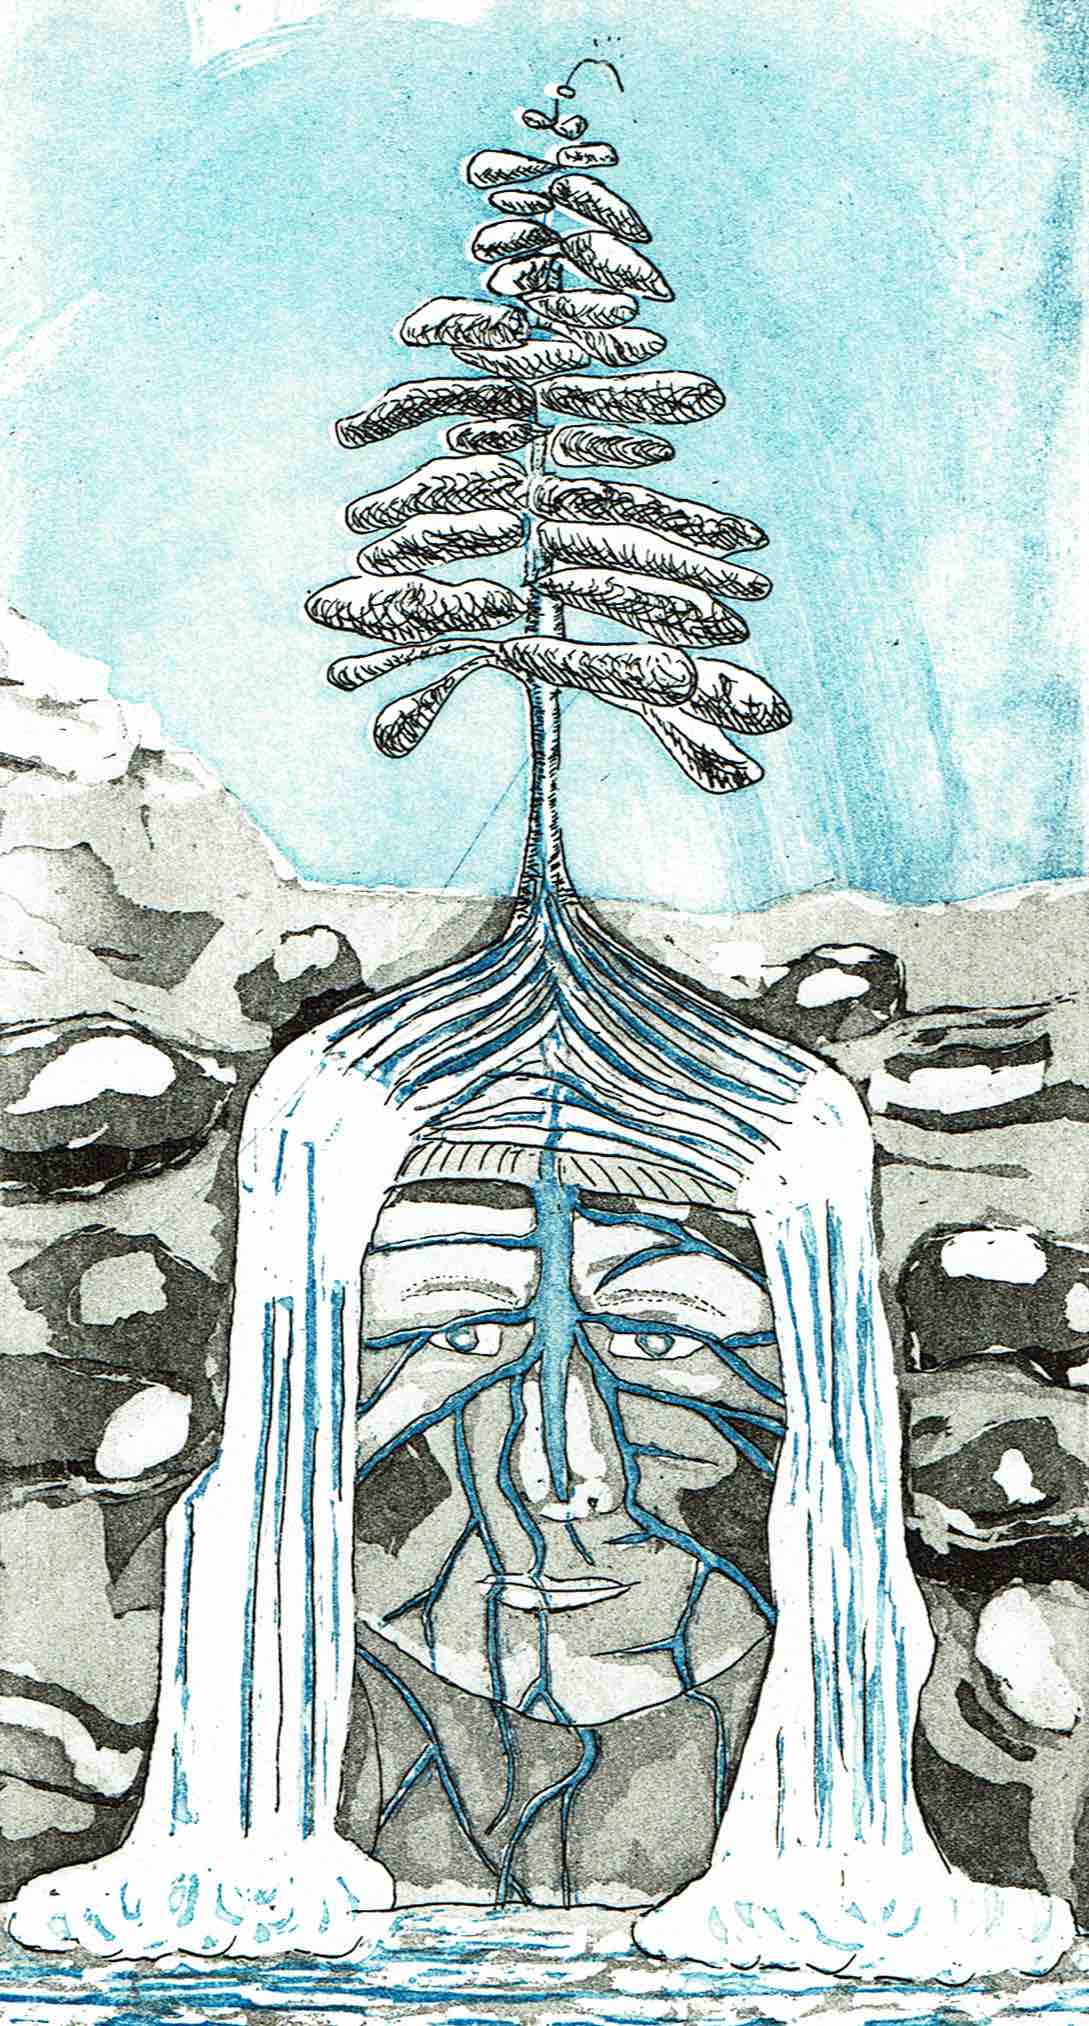 This print is a drawing, black on white, with turquoise aquatint colorization. In the centre, against a blue sky, a billowy pine tree grows from the crown of a human head that is part of a rocky land formation. The tree roots gather up streams of water that serve as hair, falling on either side of the face in waterfalls, into a sea.